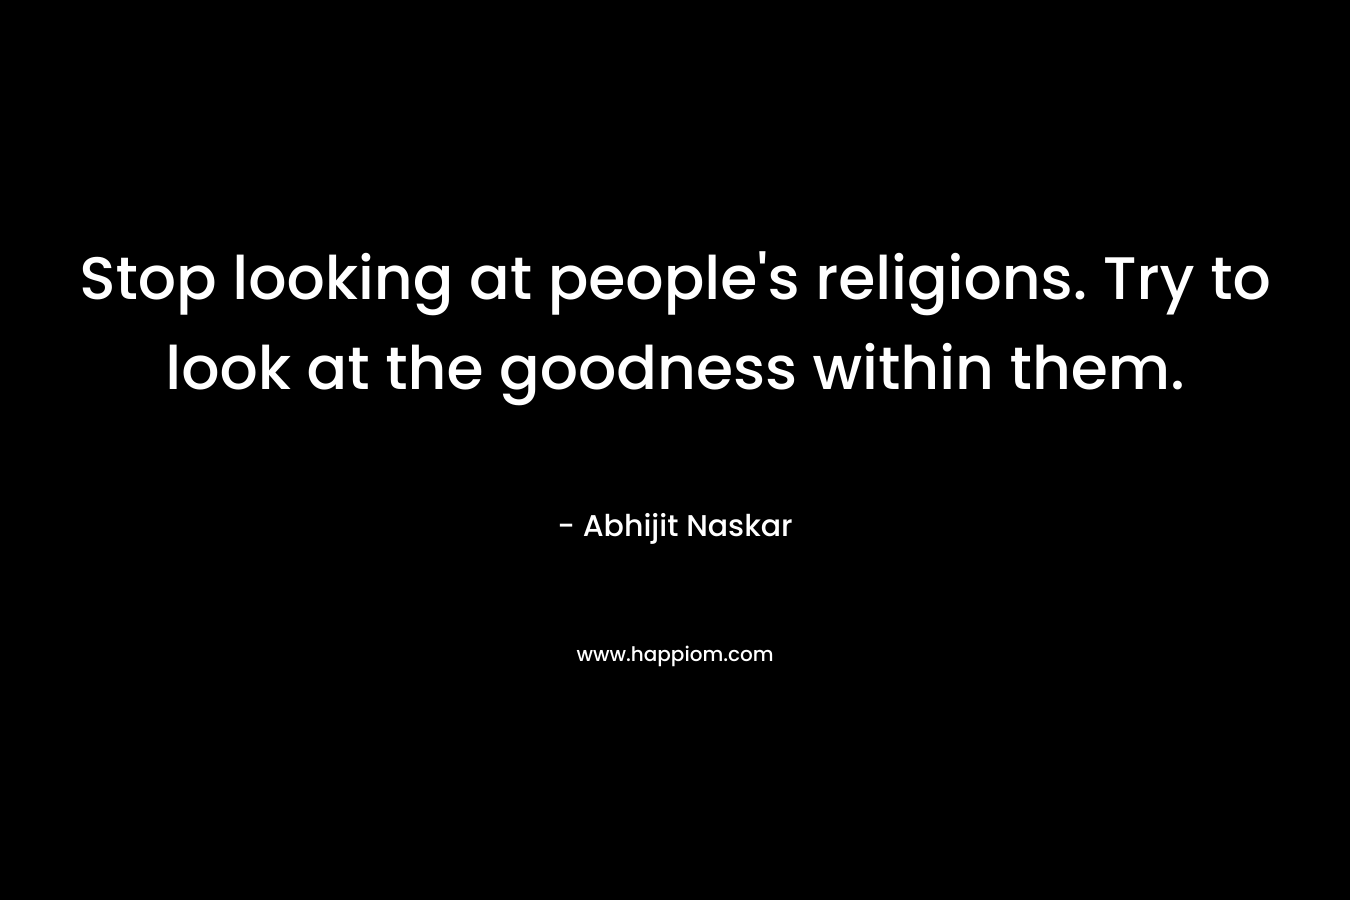 Stop looking at people’s religions. Try to look at the goodness within them. – Abhijit Naskar